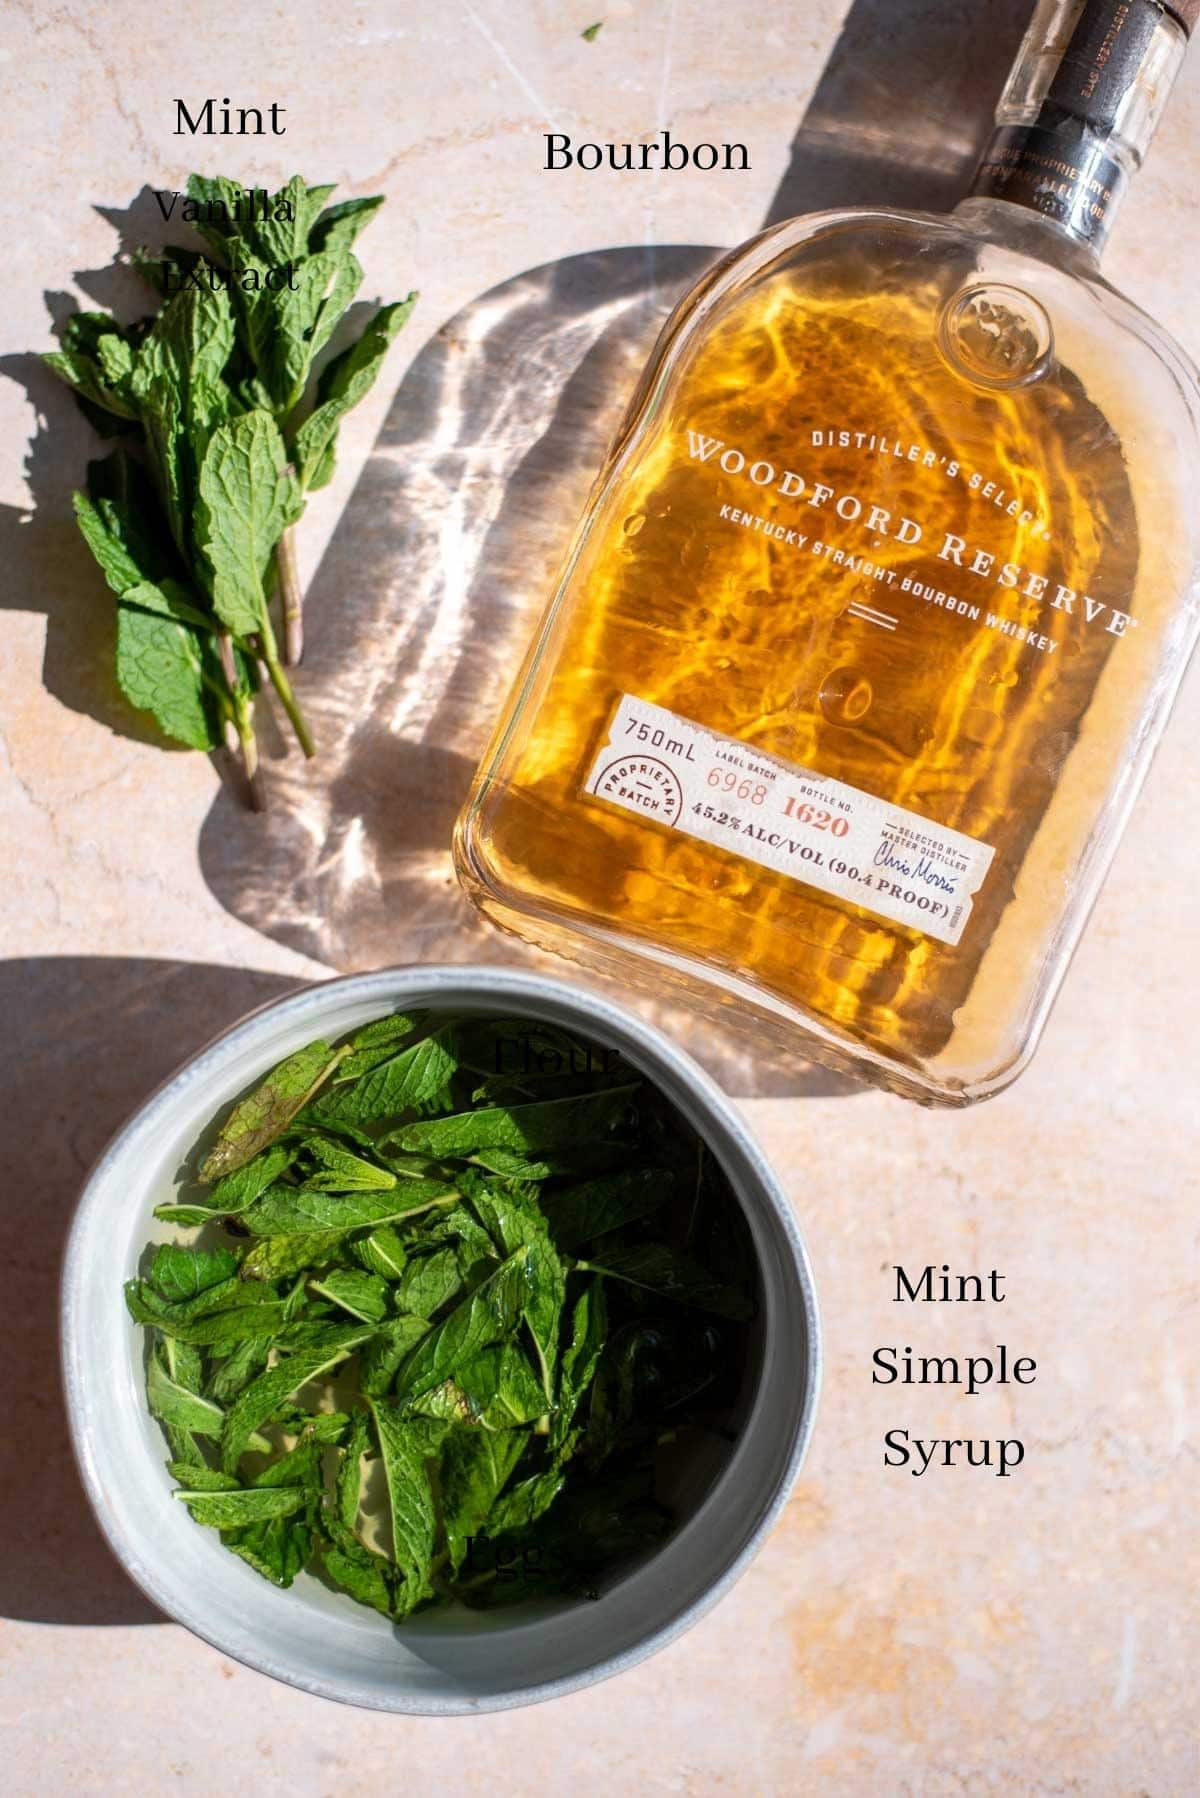 Mint julep ingredients shot from overhead on a brown table.